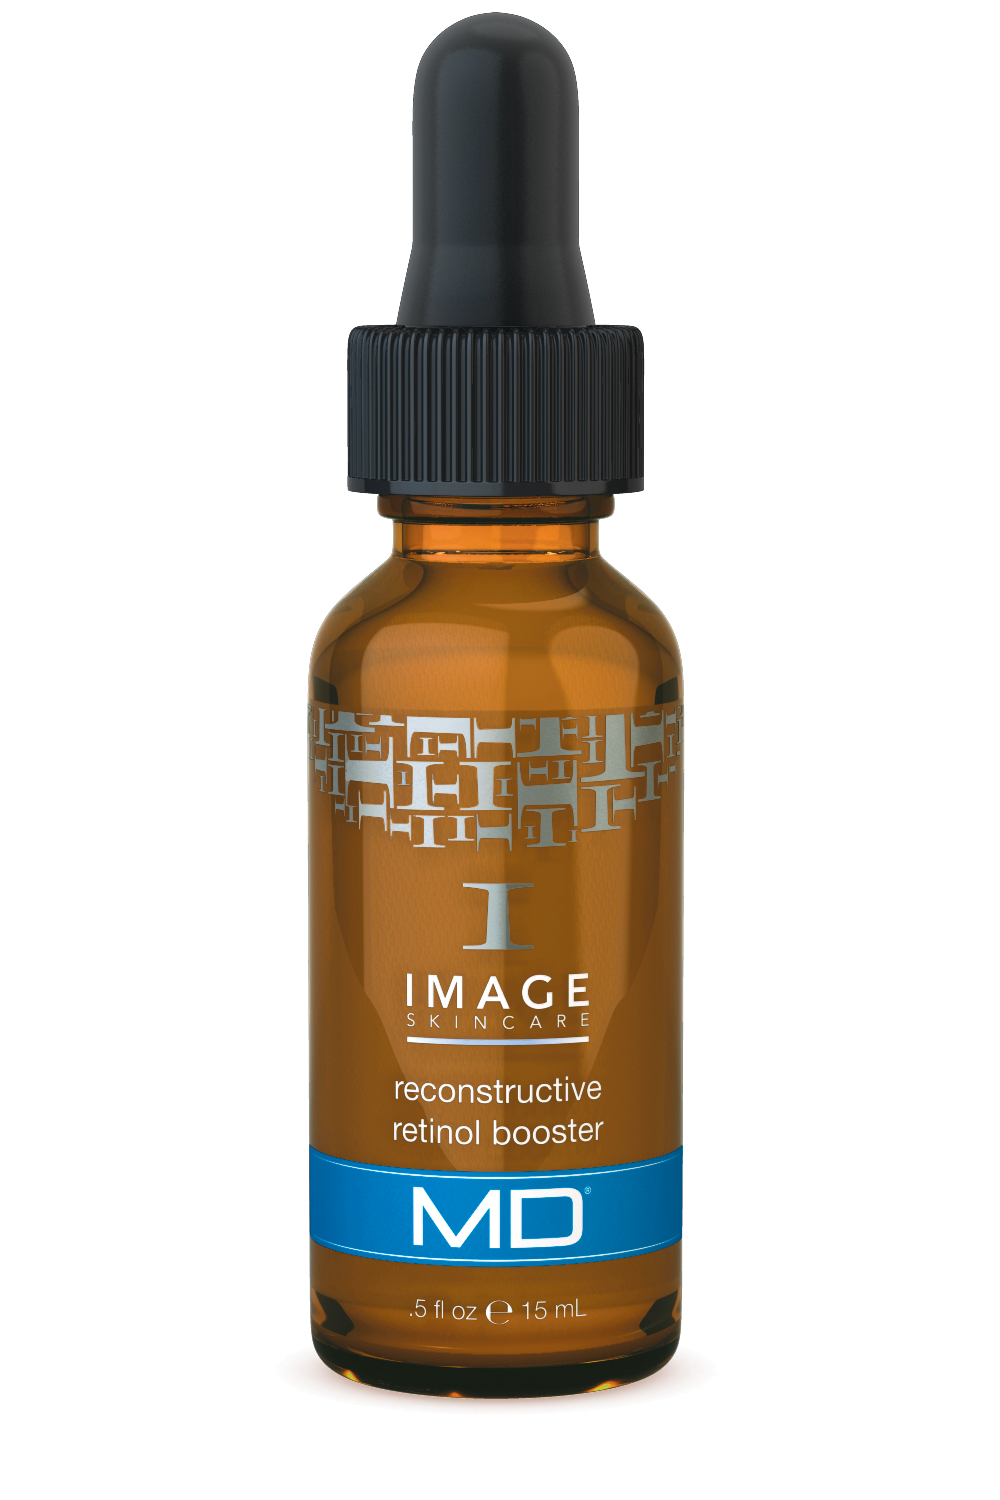 Image MD Reconstructive Retinol Booster - Simply You Med Spa